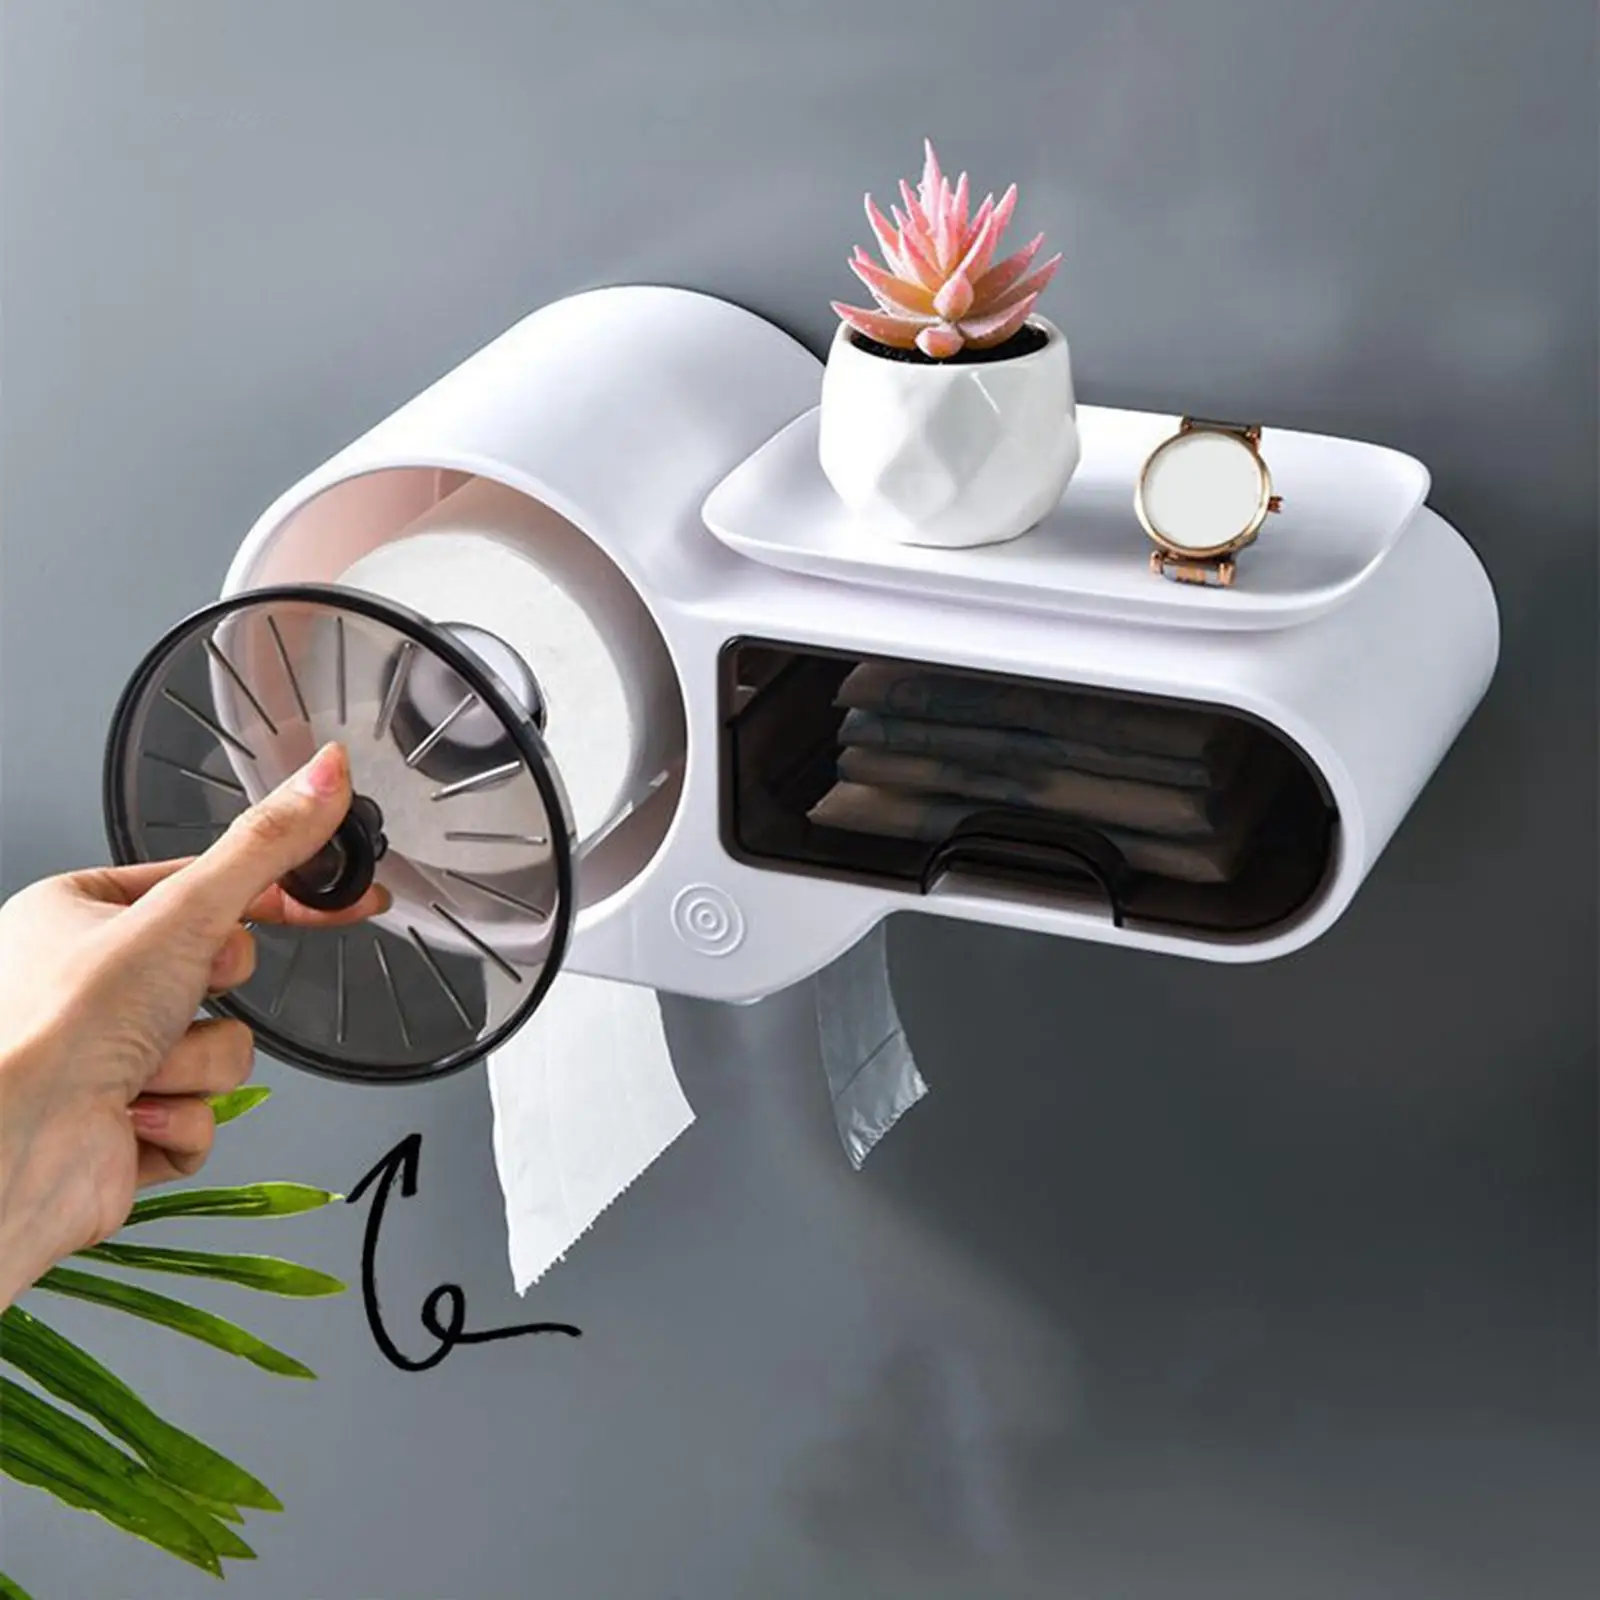 Multifunction Wall Mounted Toilet Paper Holder Paper Dispenser Waterproof Adhesive Organizer for Bathroom WC Accessories White